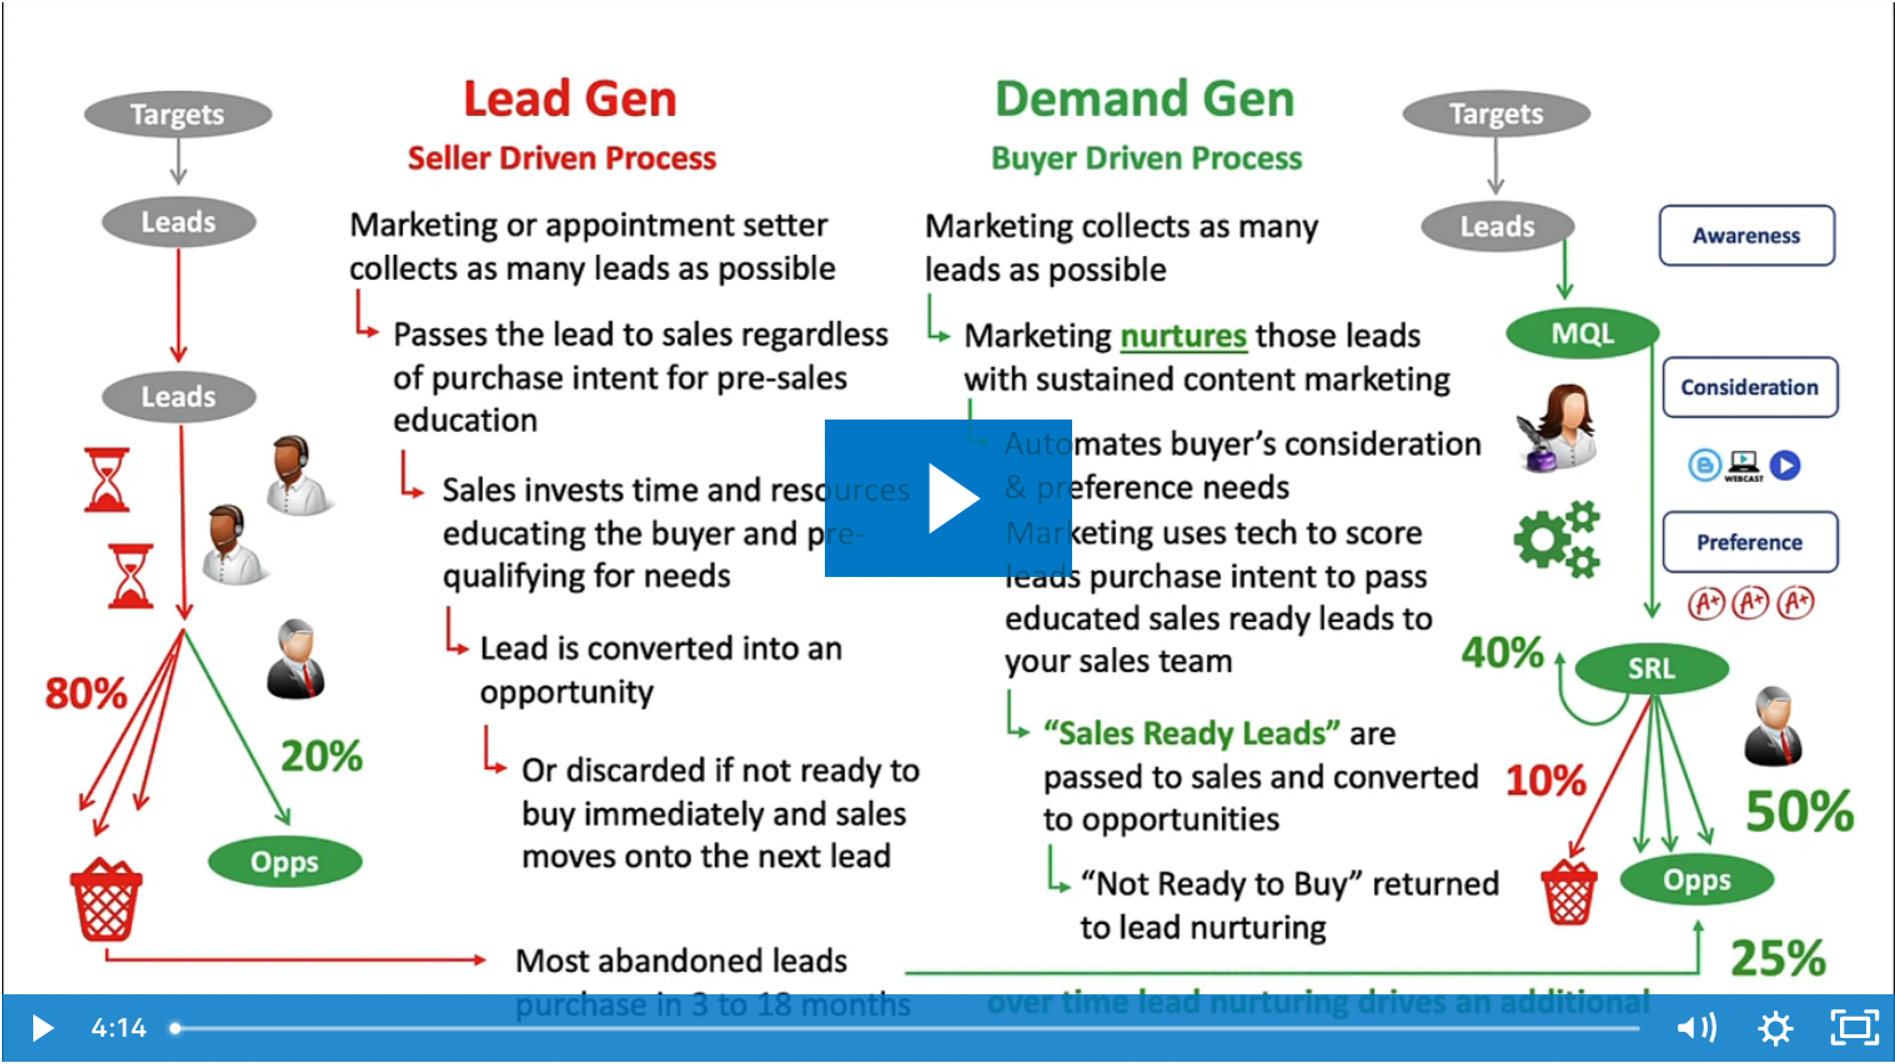 The different uses of lead generation vs. demand generation campaings